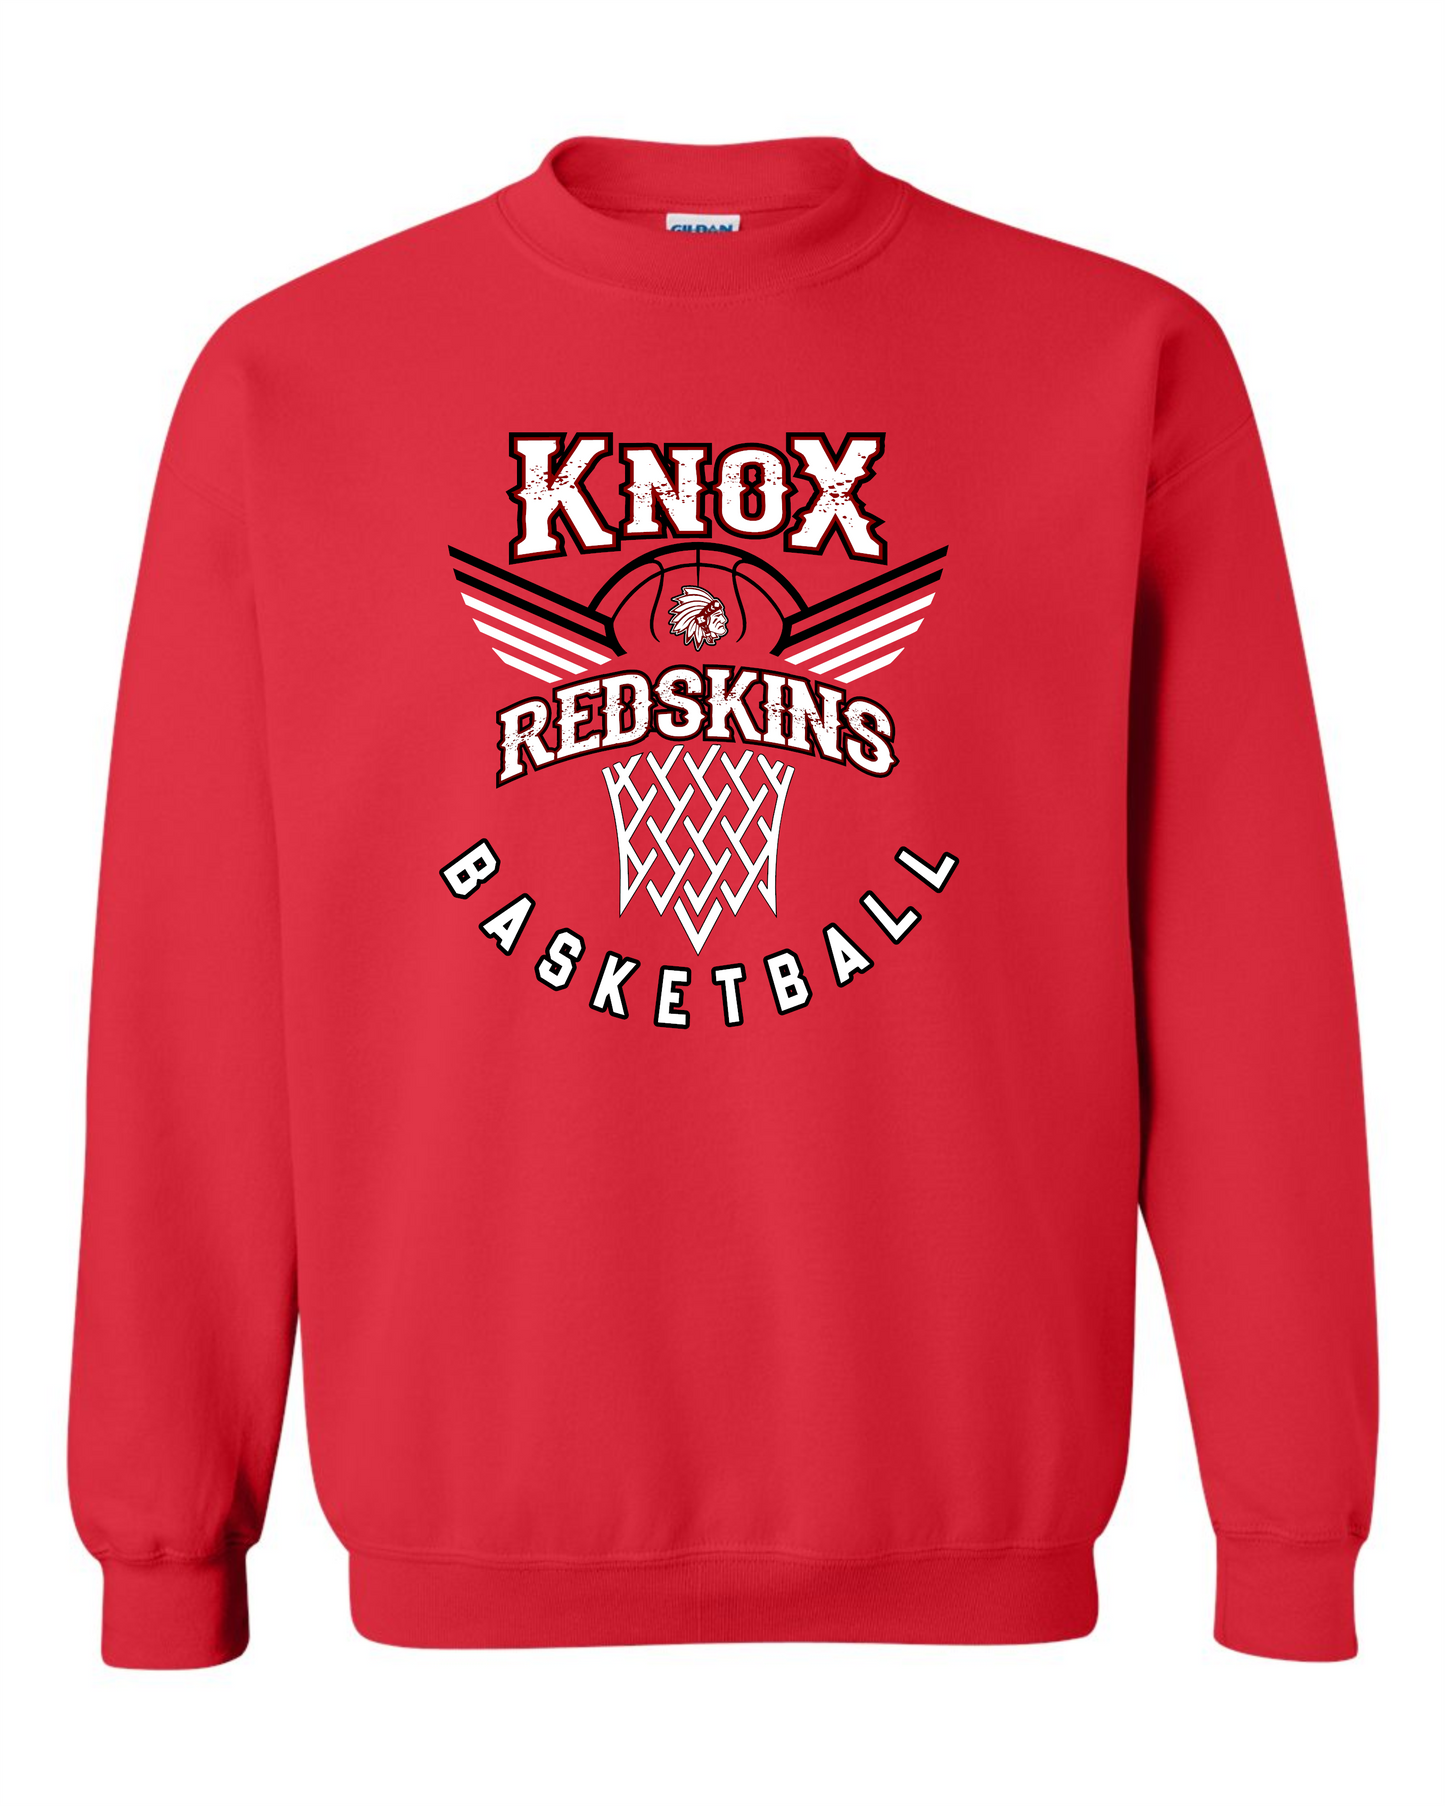 Knox Redskins Basketball Crewneck Sweatshirt - Red - Adult and Youth Sizes